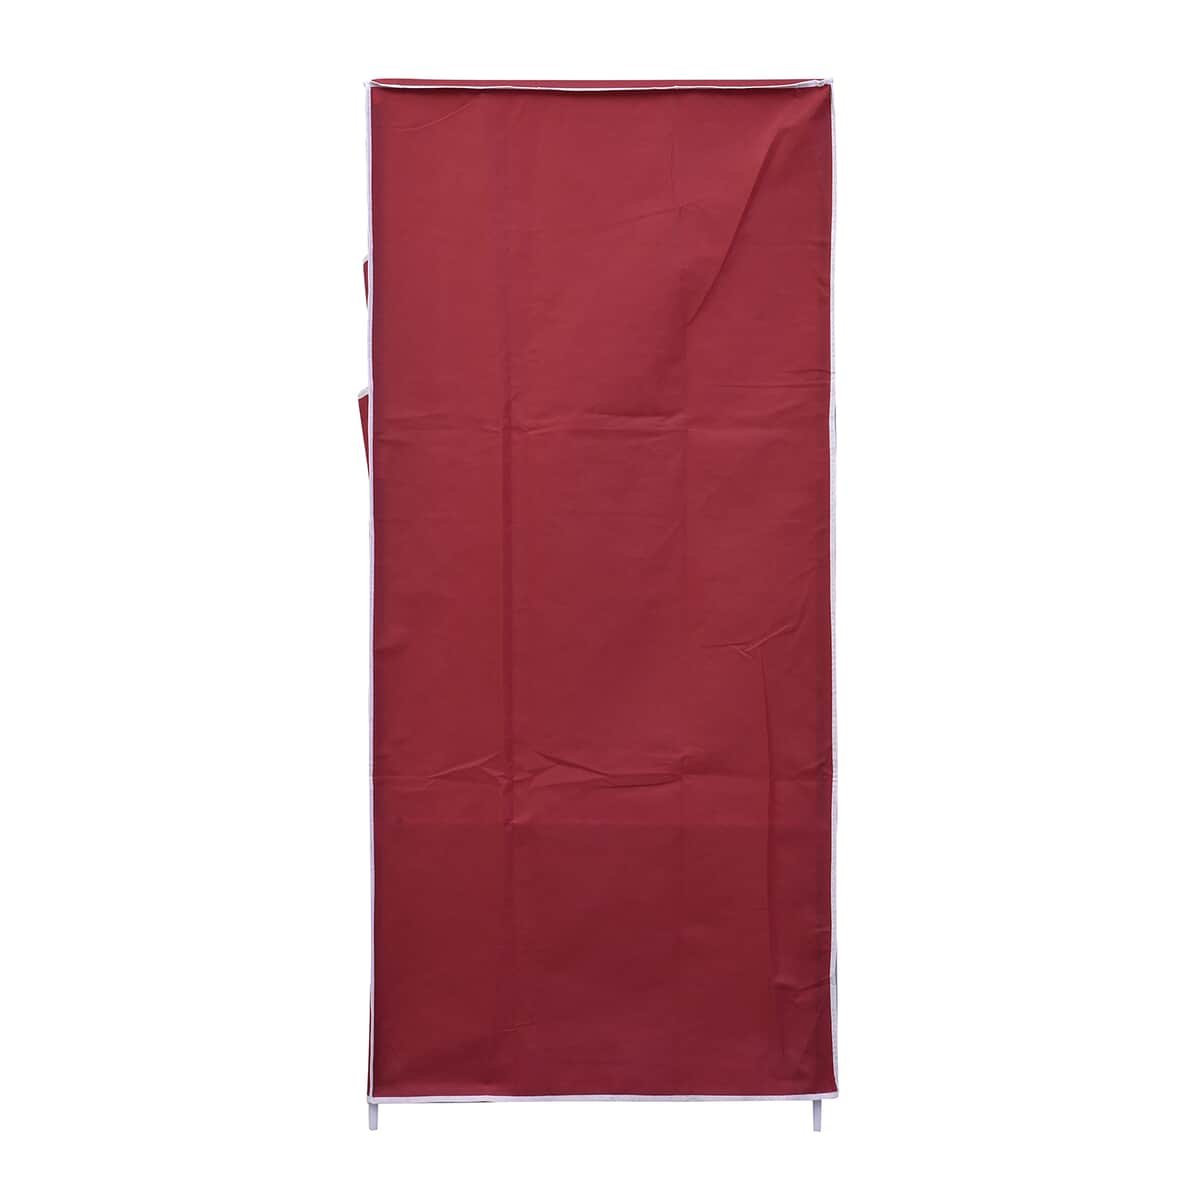 Red Collapsible Wardrobe with 2 Outer pockets and Zippered Door (Non-Woven Fabric) image number 4